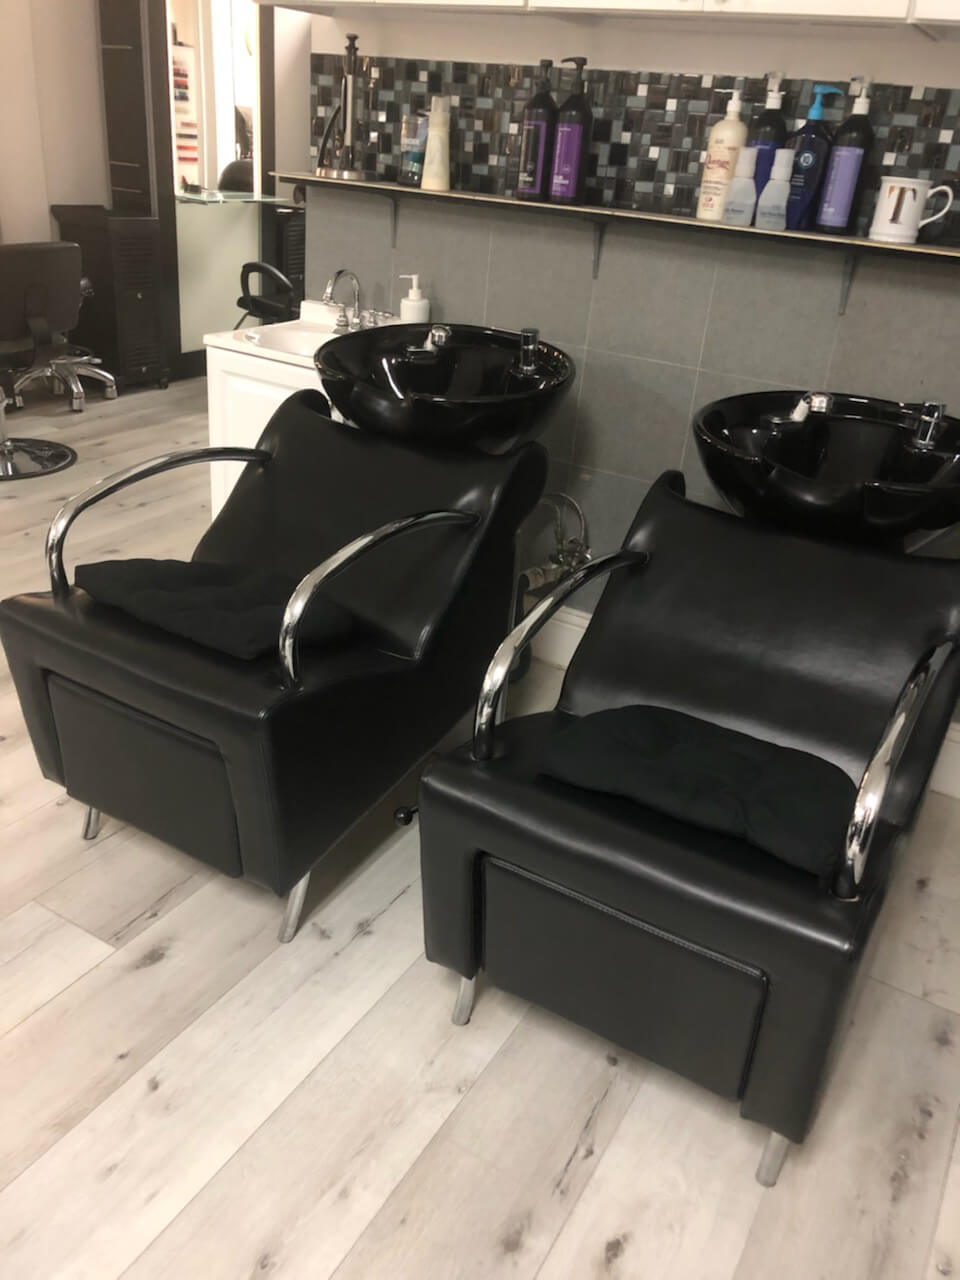 New salon chairs in the color black.